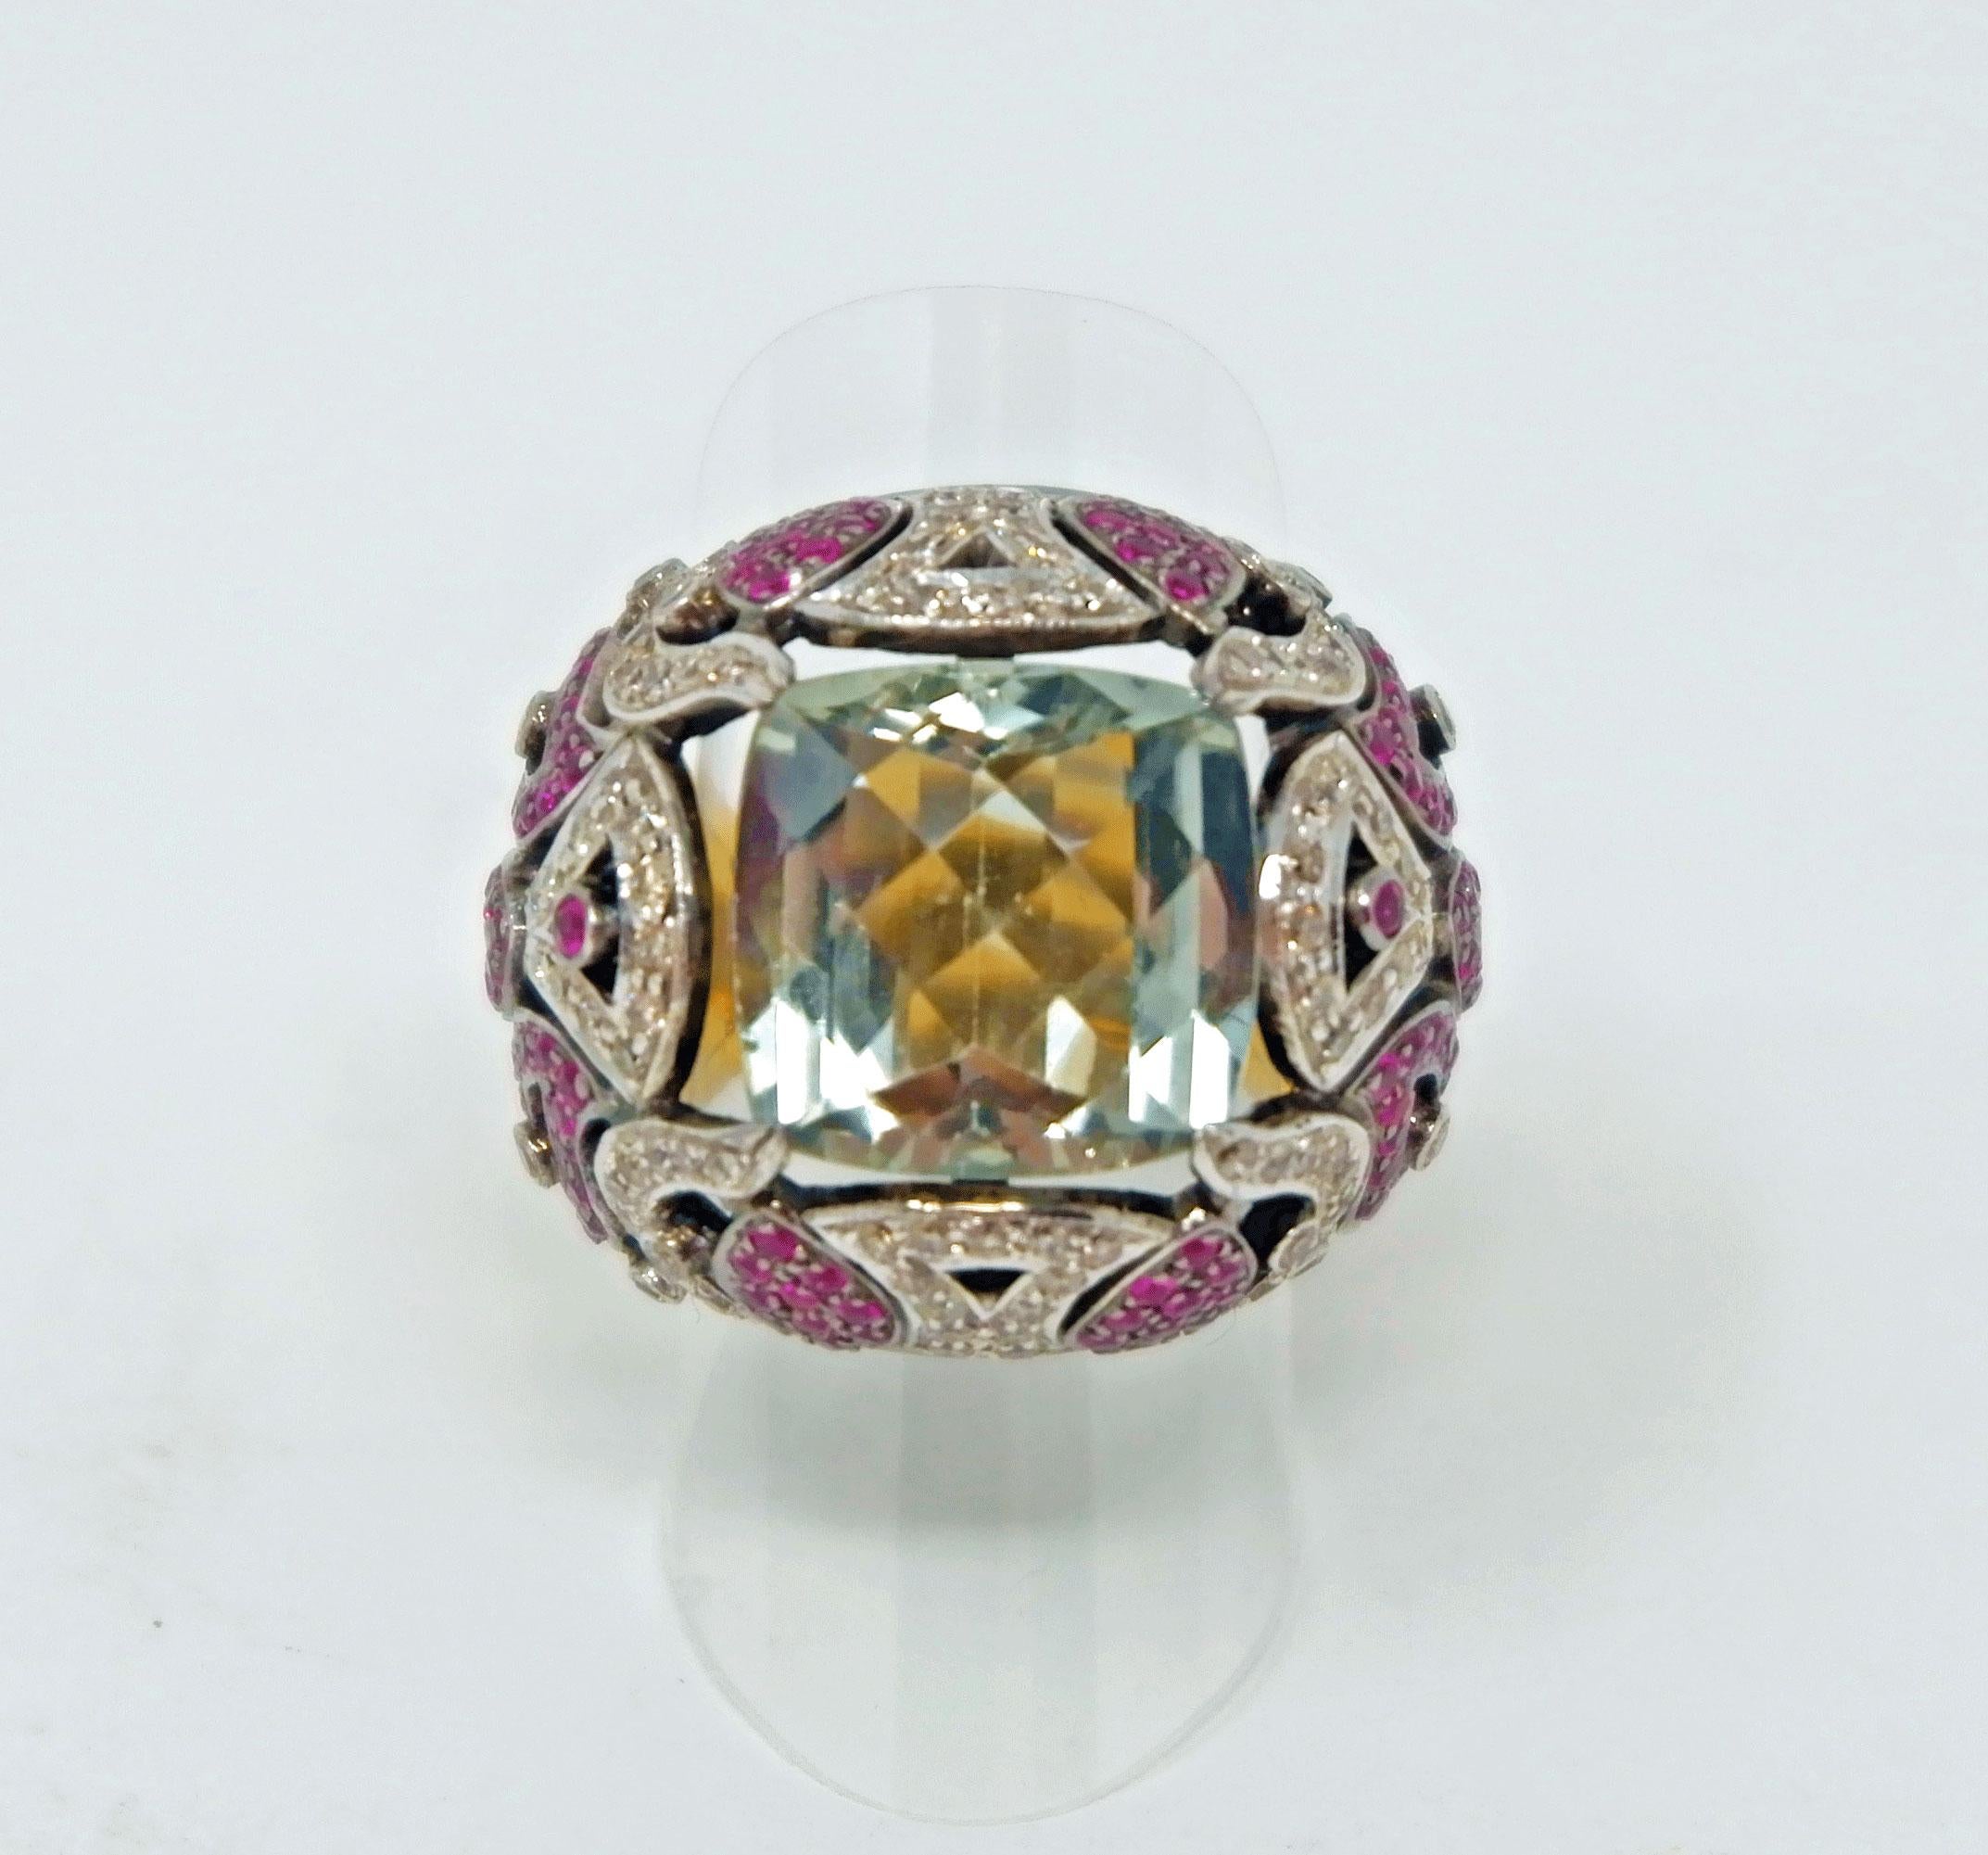 Spectacular ring featuring a large square cut, faceted green amethyst. The amethyst is surrounded by diamonds and hot pink sapphires set in silver in a paisley pattern. The bottom half of the ring is gold plated on silver. This is a unique piece of